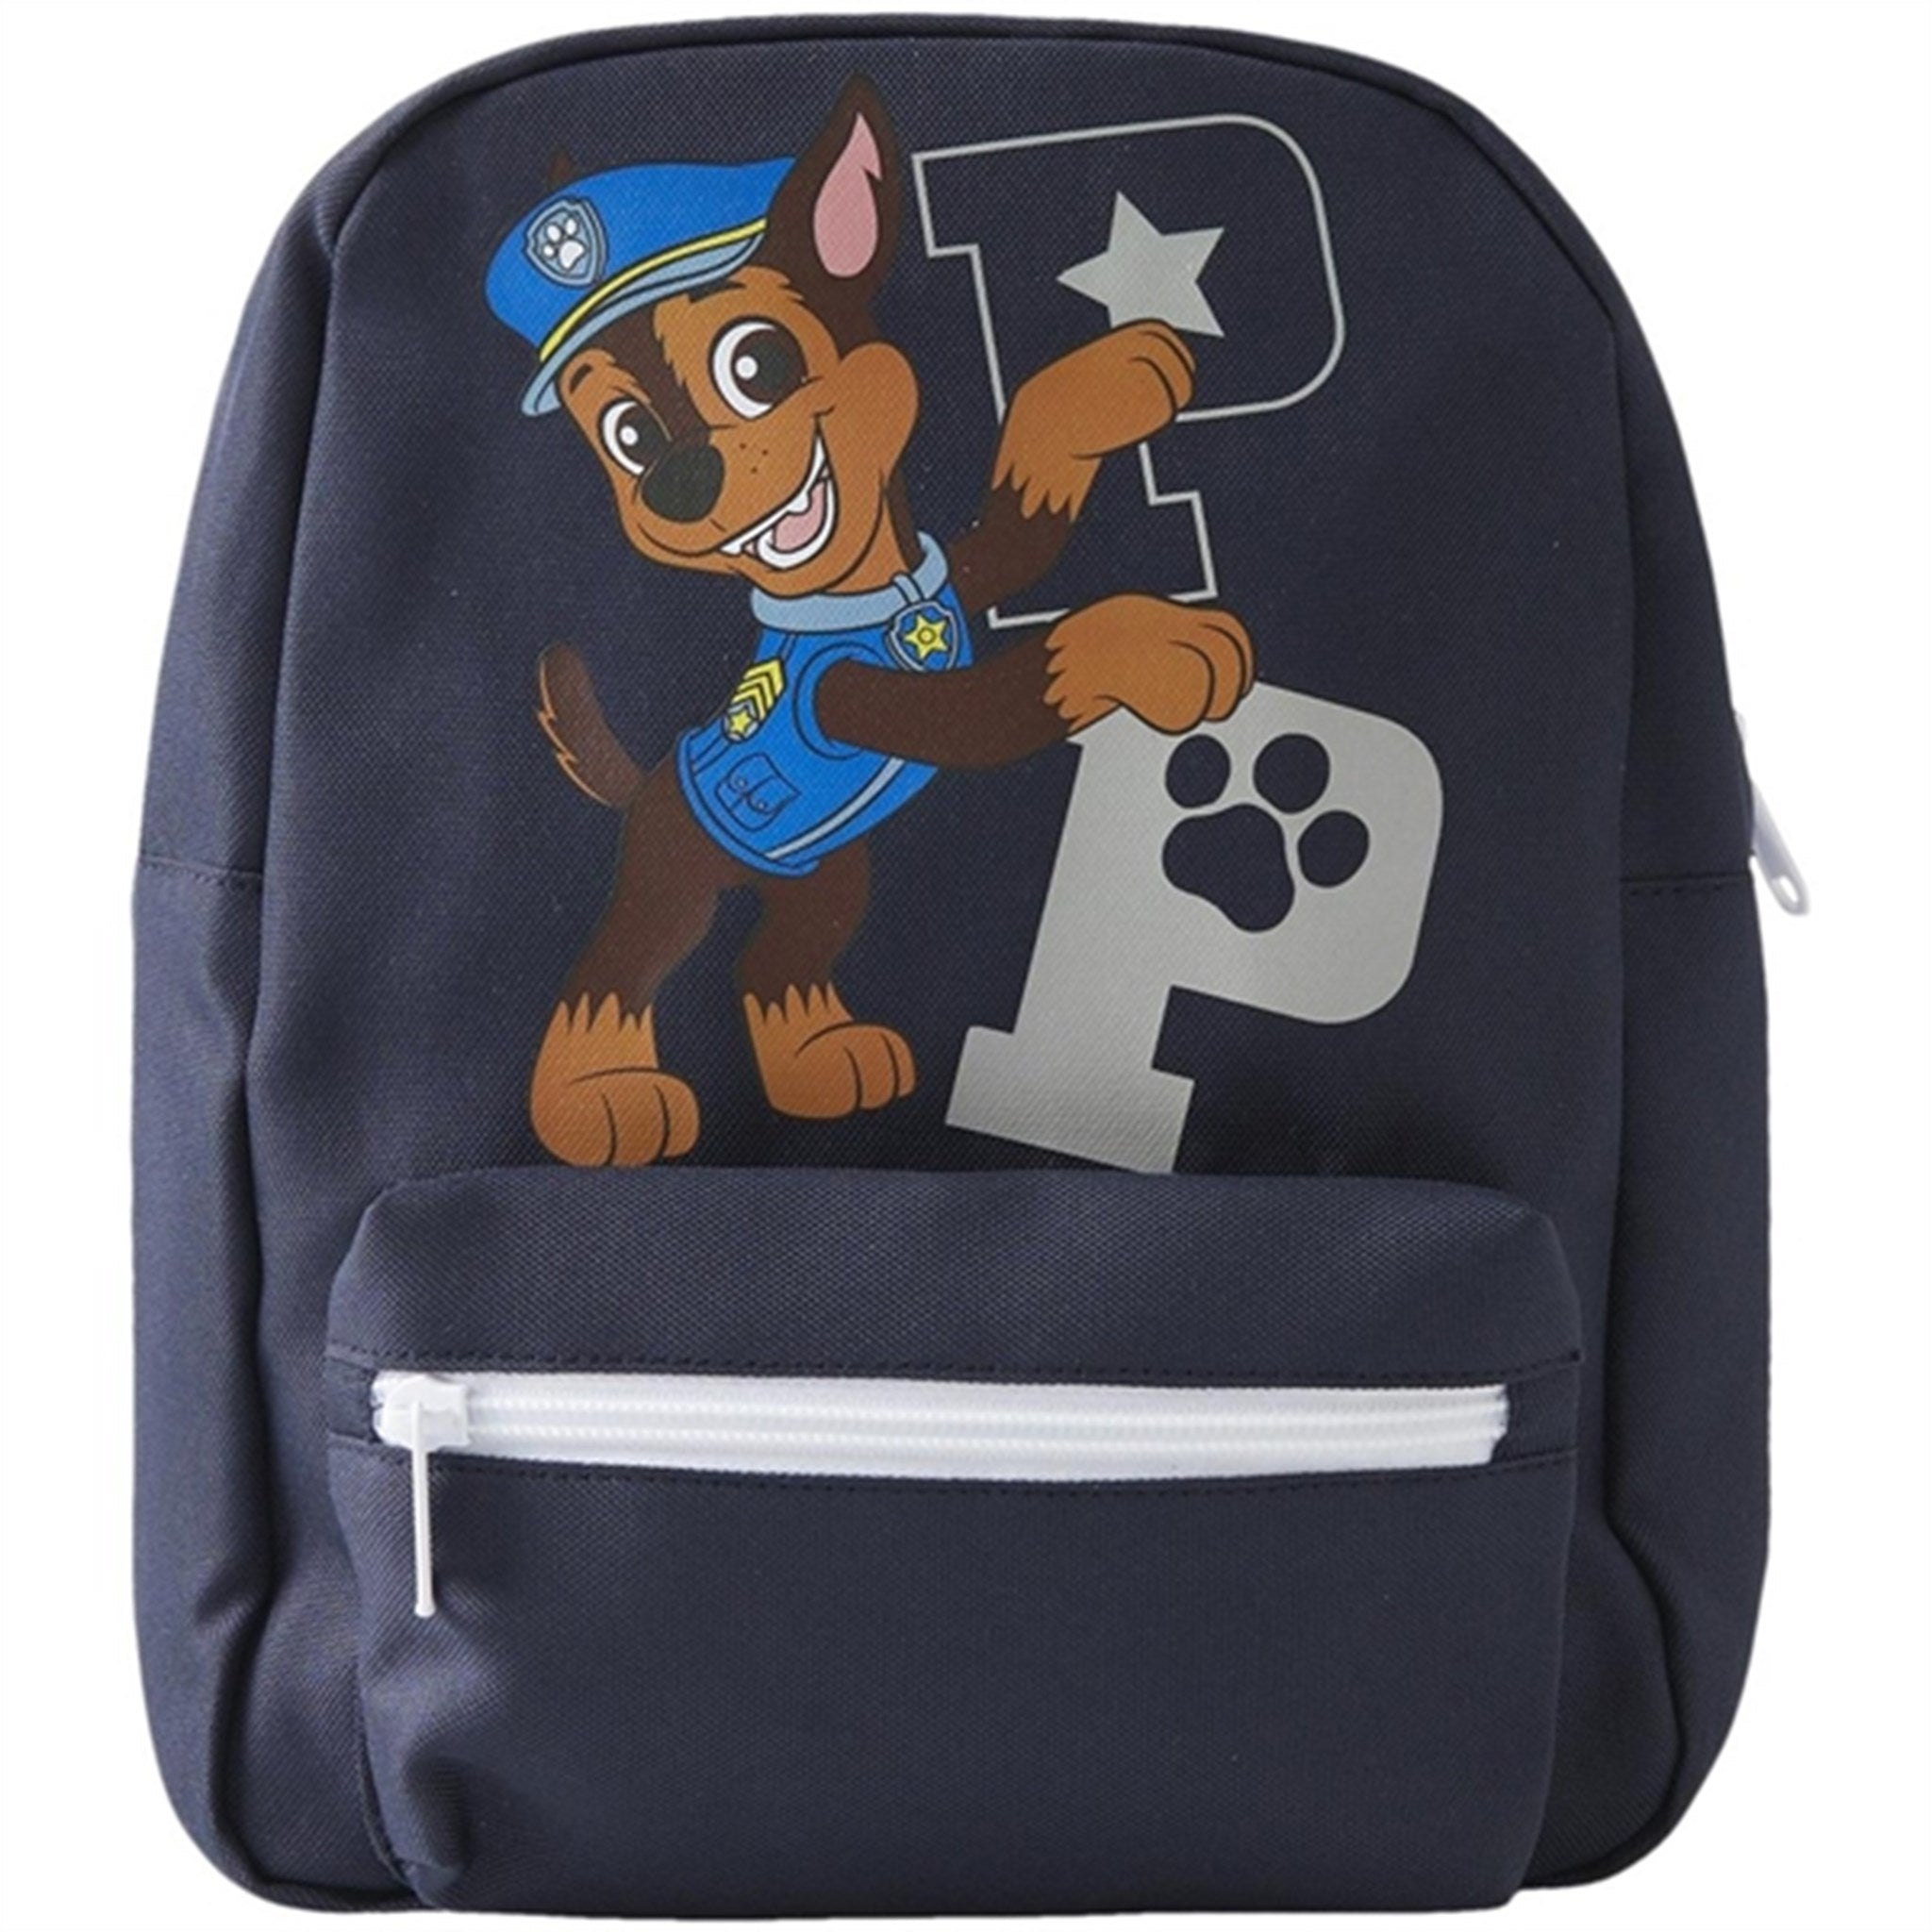 Name it Dark Sapphire Fax Paw Patrol Backpack